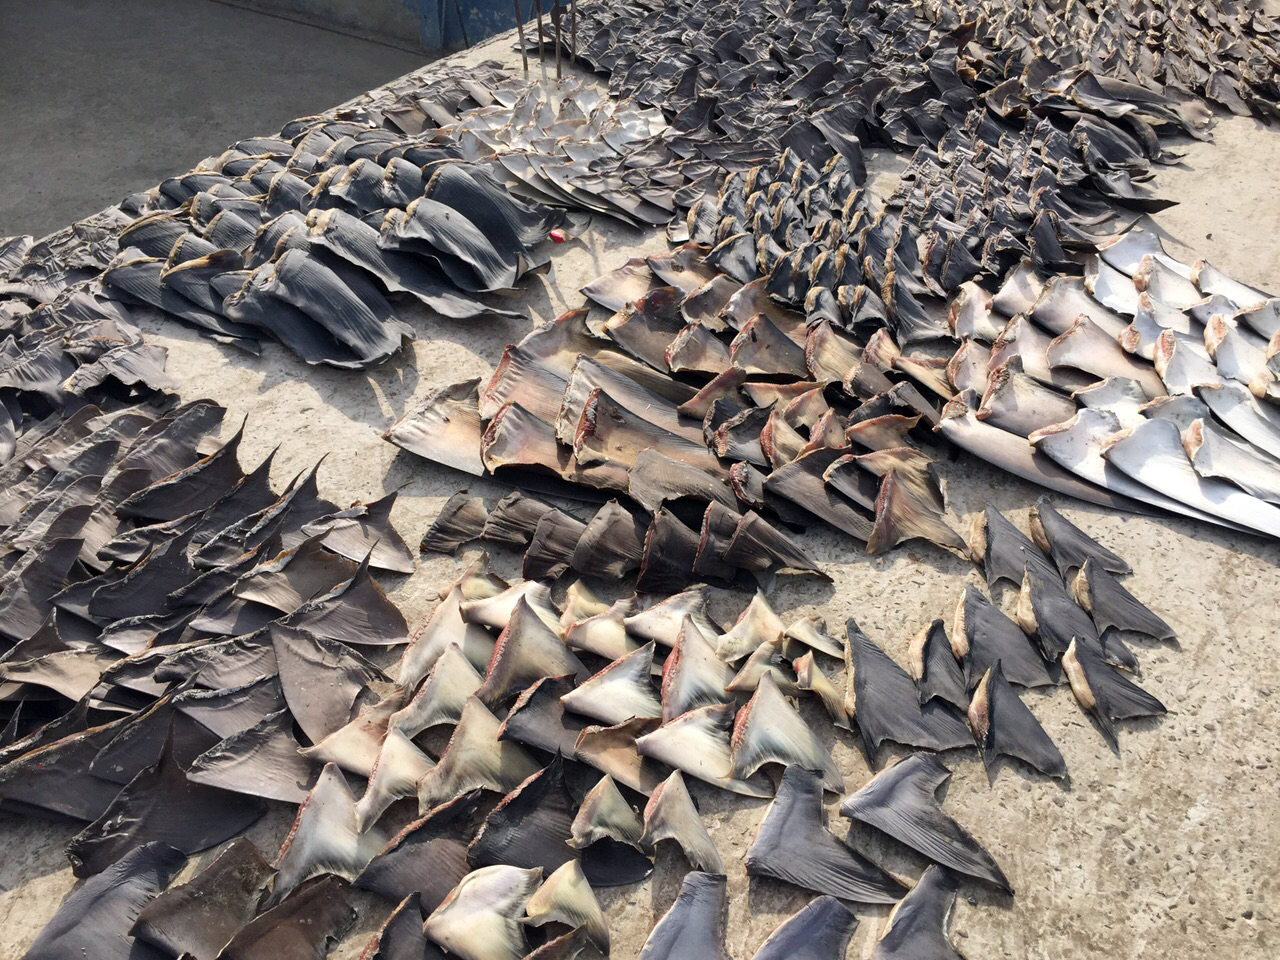 This photo released by Ecuador's Attorney General, shows hundreds of shark fins seized by the police in Manta, Ecuador, Wednesday, May 27, 2015.